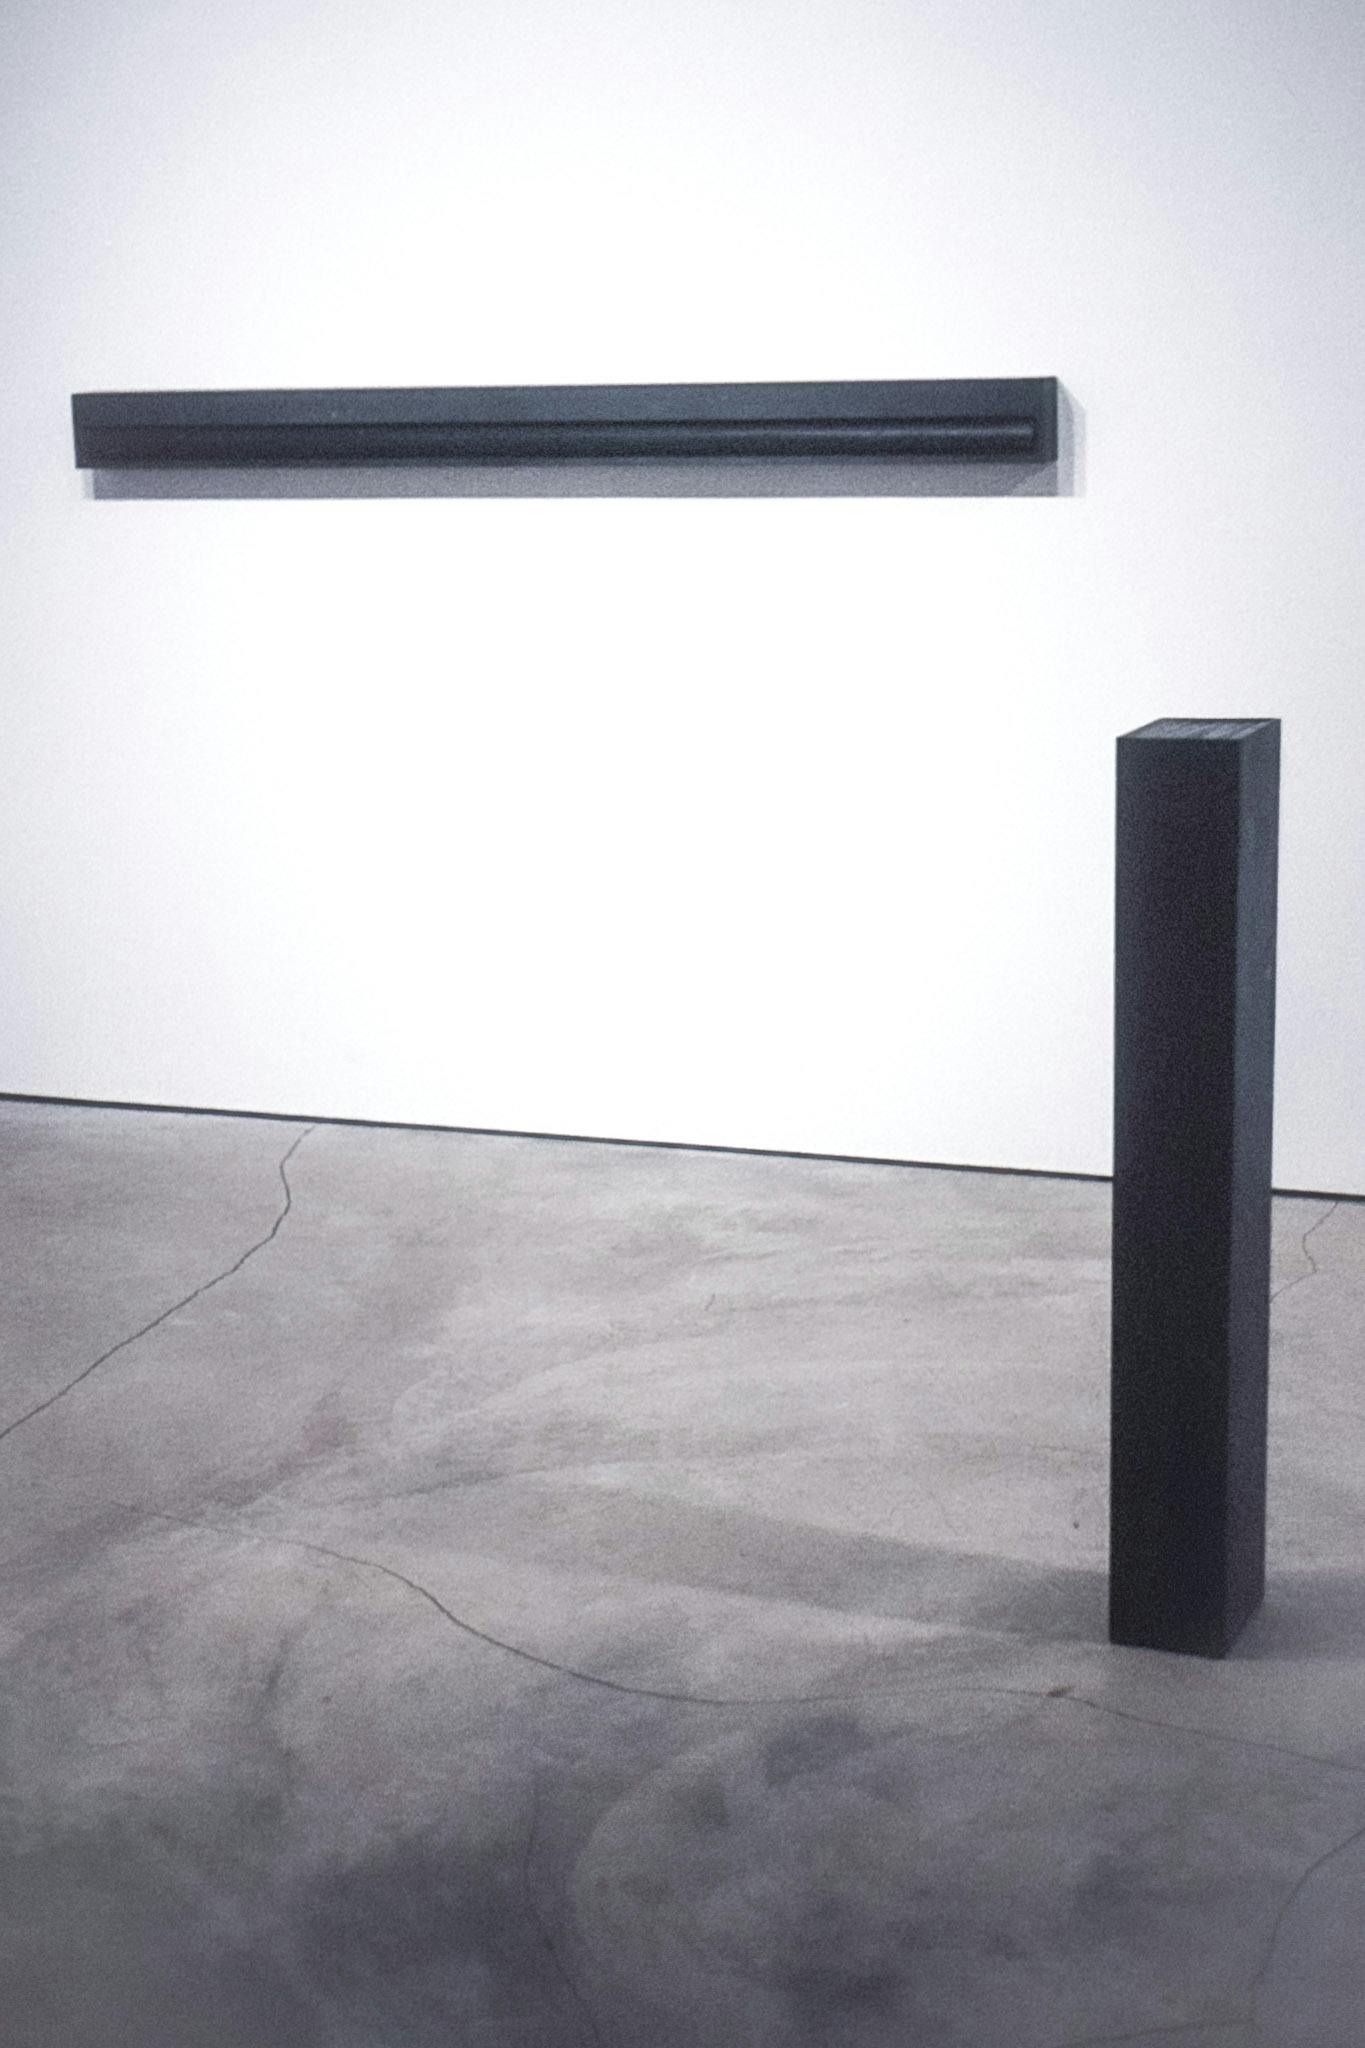 2 artworks in a gallery. One is a black rectangular prism with a black cylinder embedded in it, mounted horizontally on the wall. The other is a black rectangular prism placed vertically on the floor. 